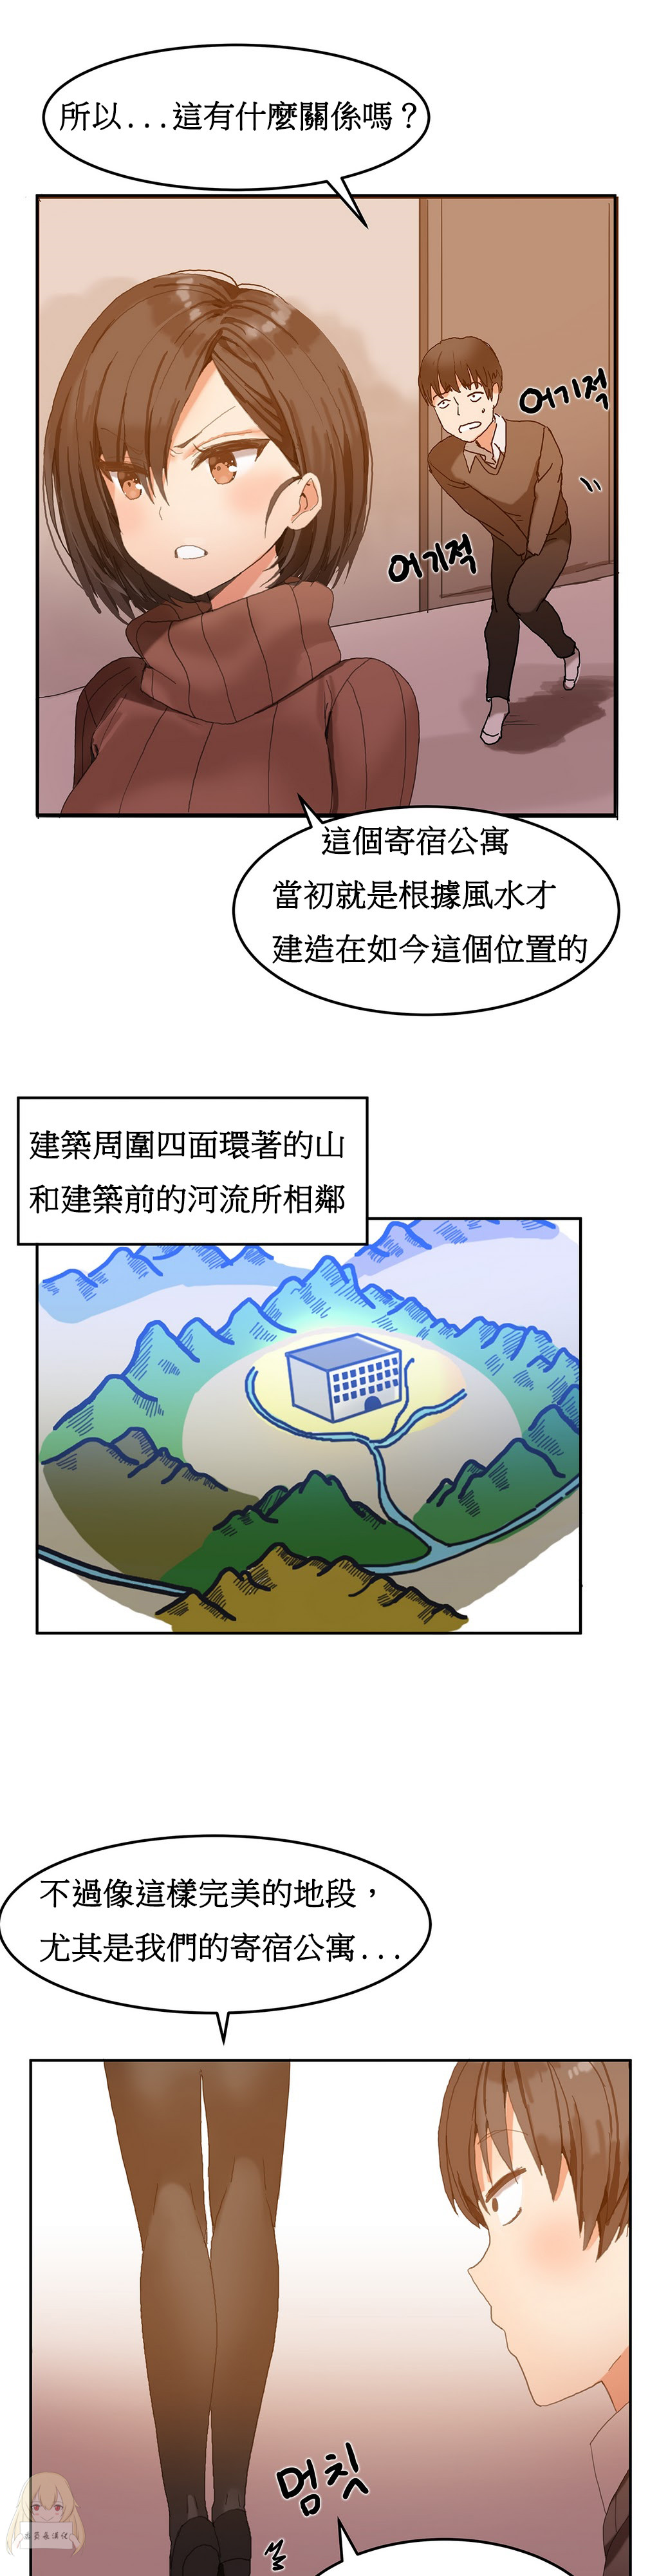 [Mx2J] Hahri's Lumpy Boardhouse Ch. 1~12【委員長個人漢化】（持續更新） page 37 full